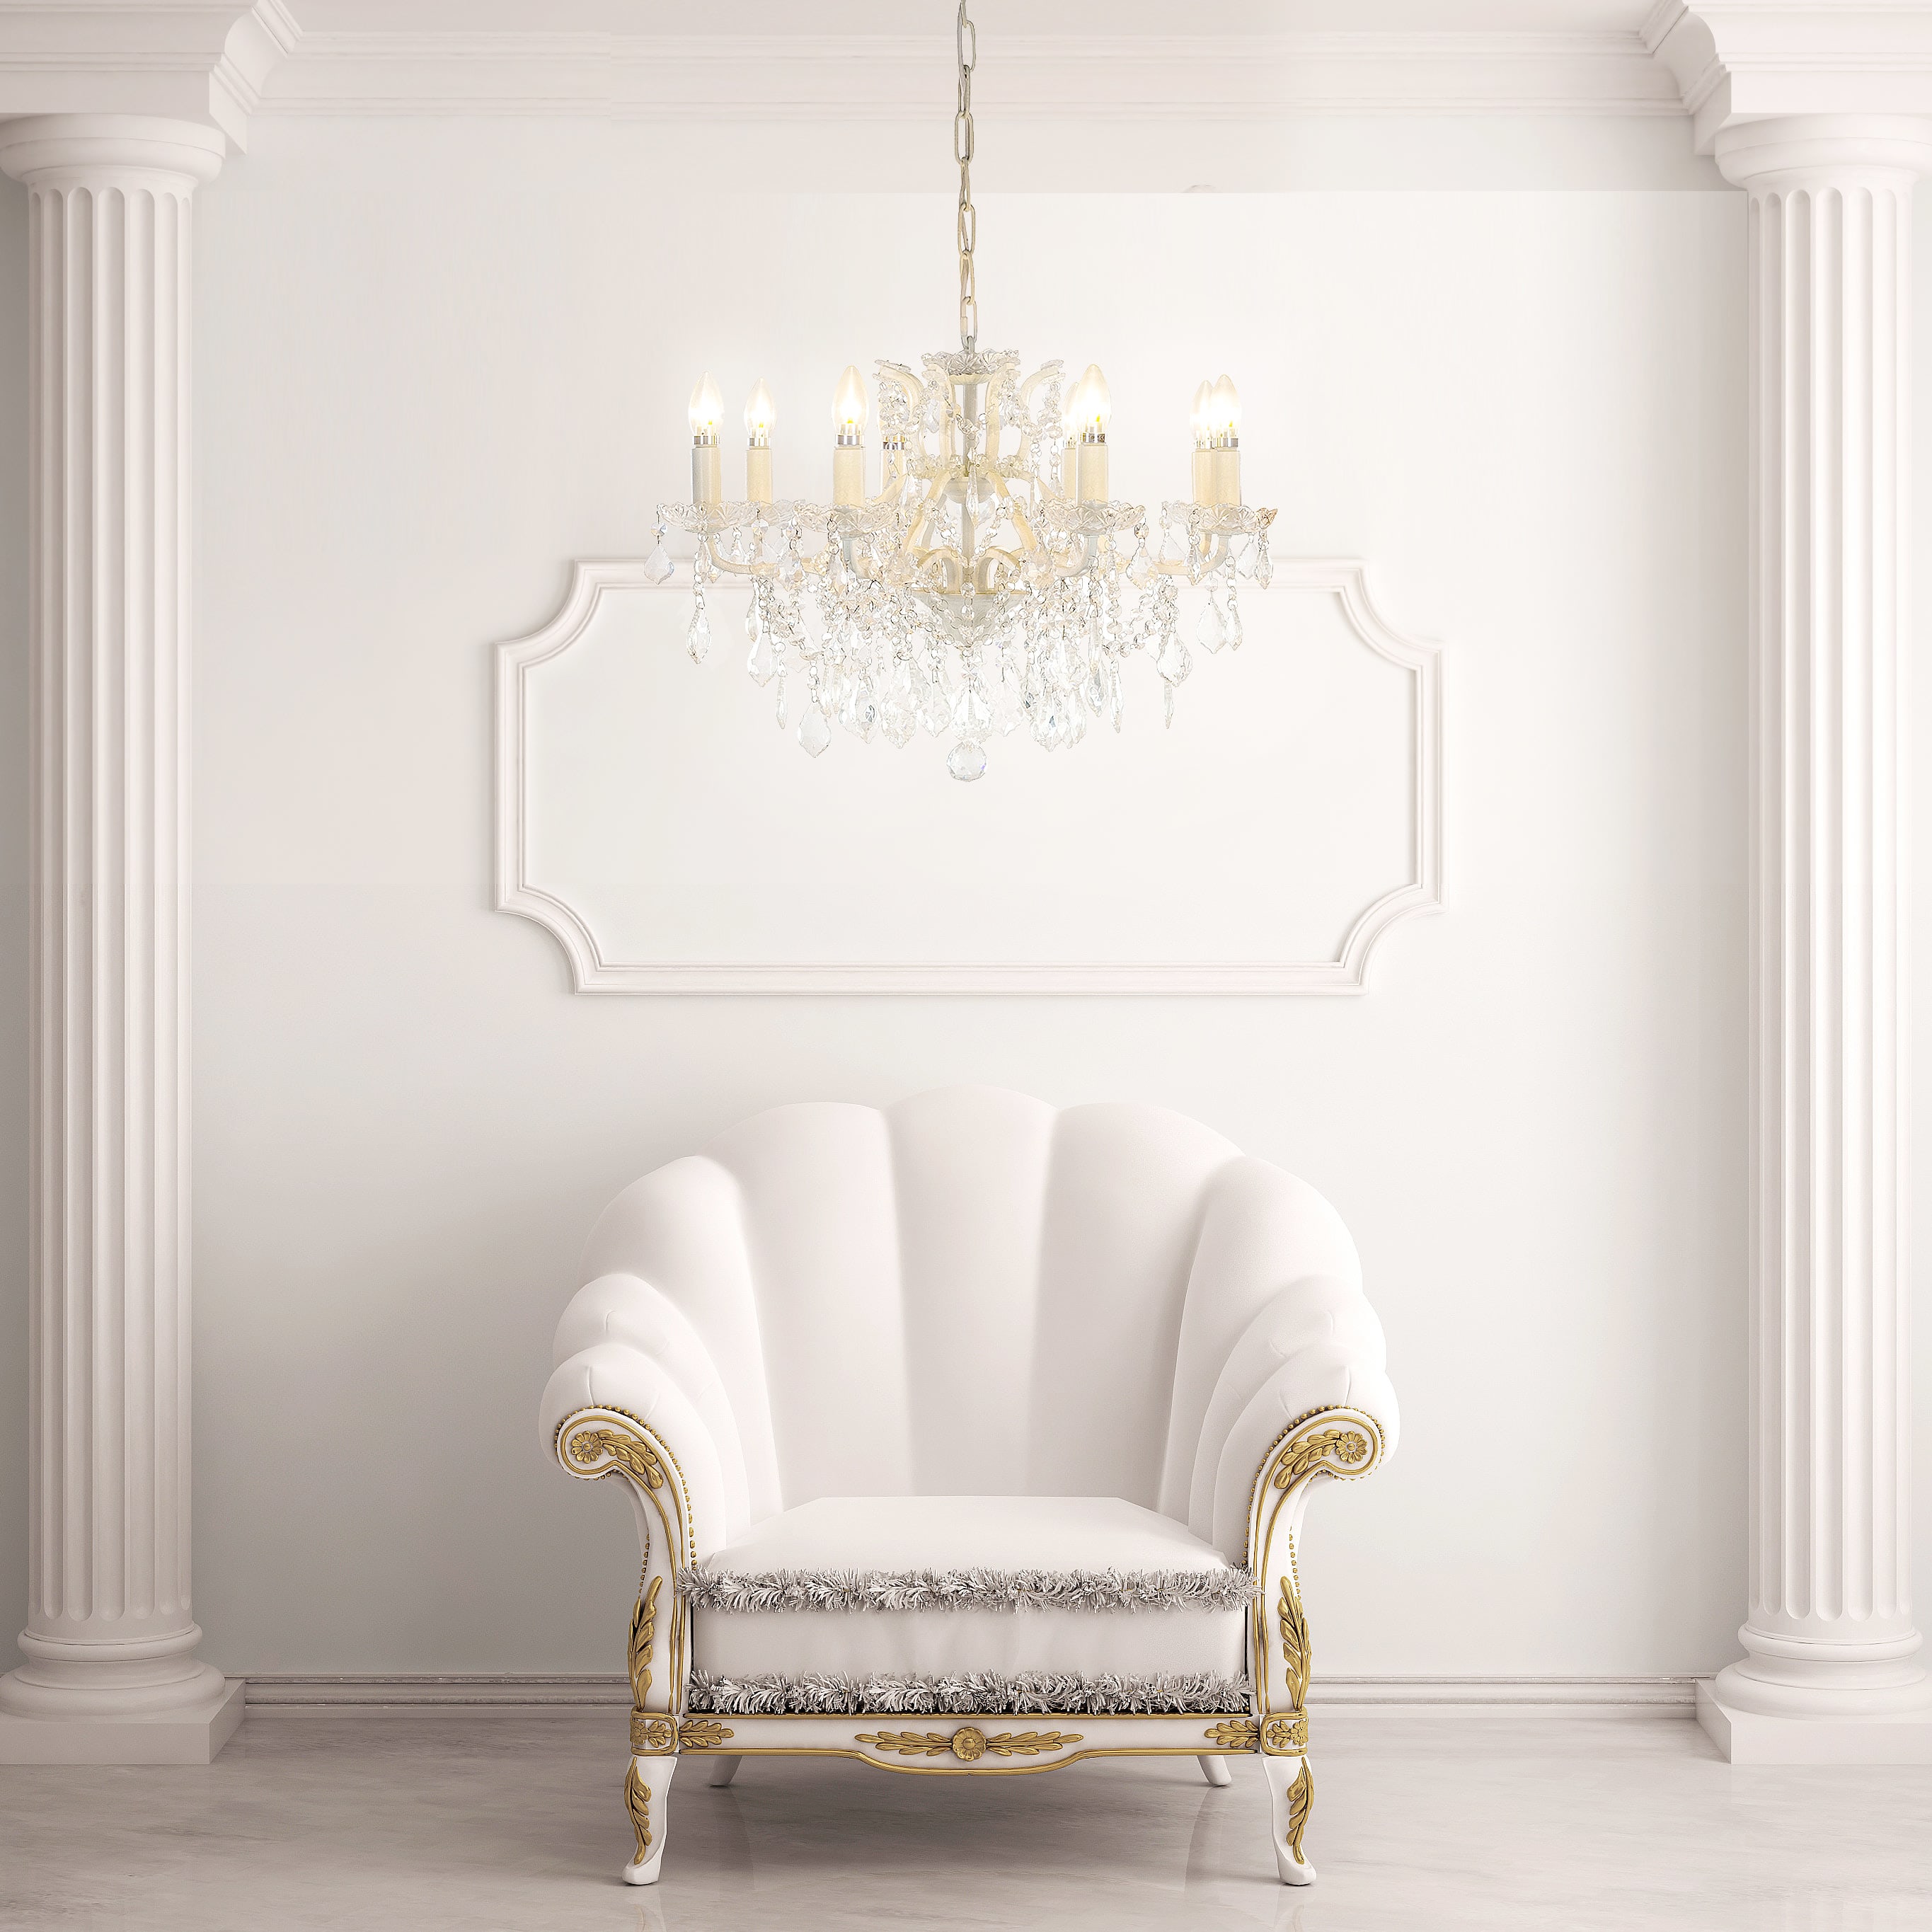 8 Arm Creamy White Shallow French Chandelier